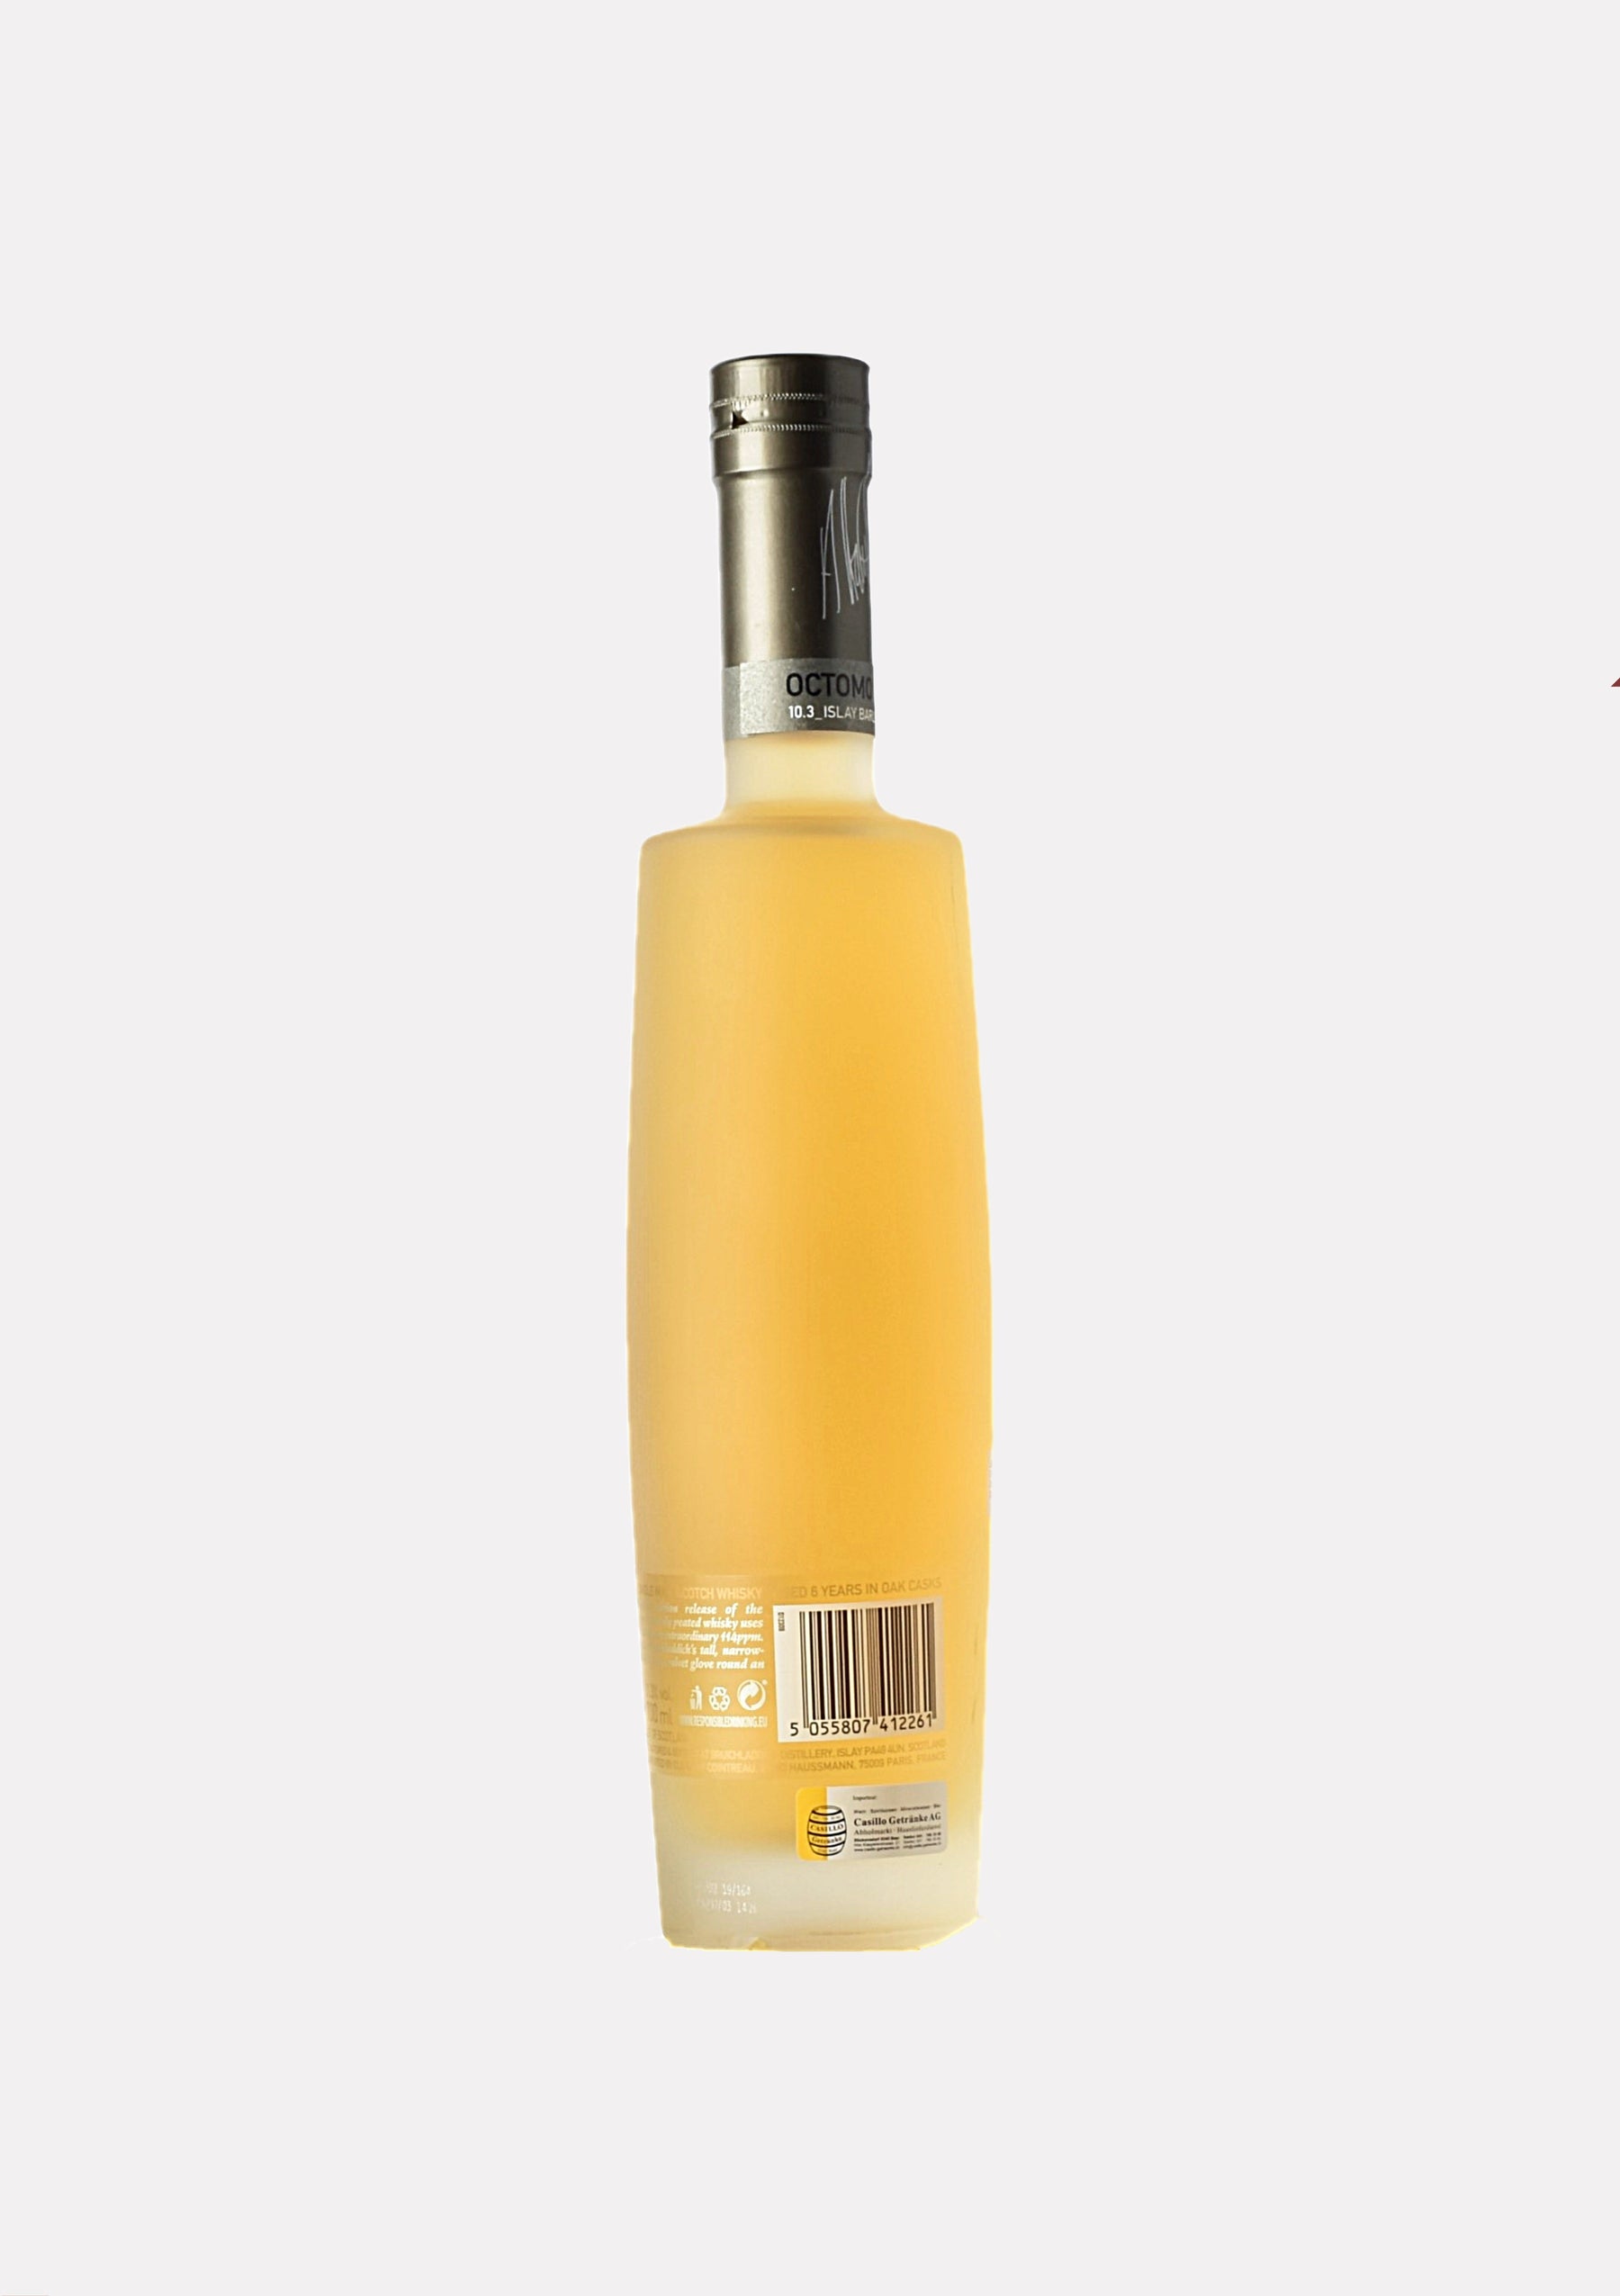 Octomore 2013- 2019 6 Jahre 10.3 114 ppm